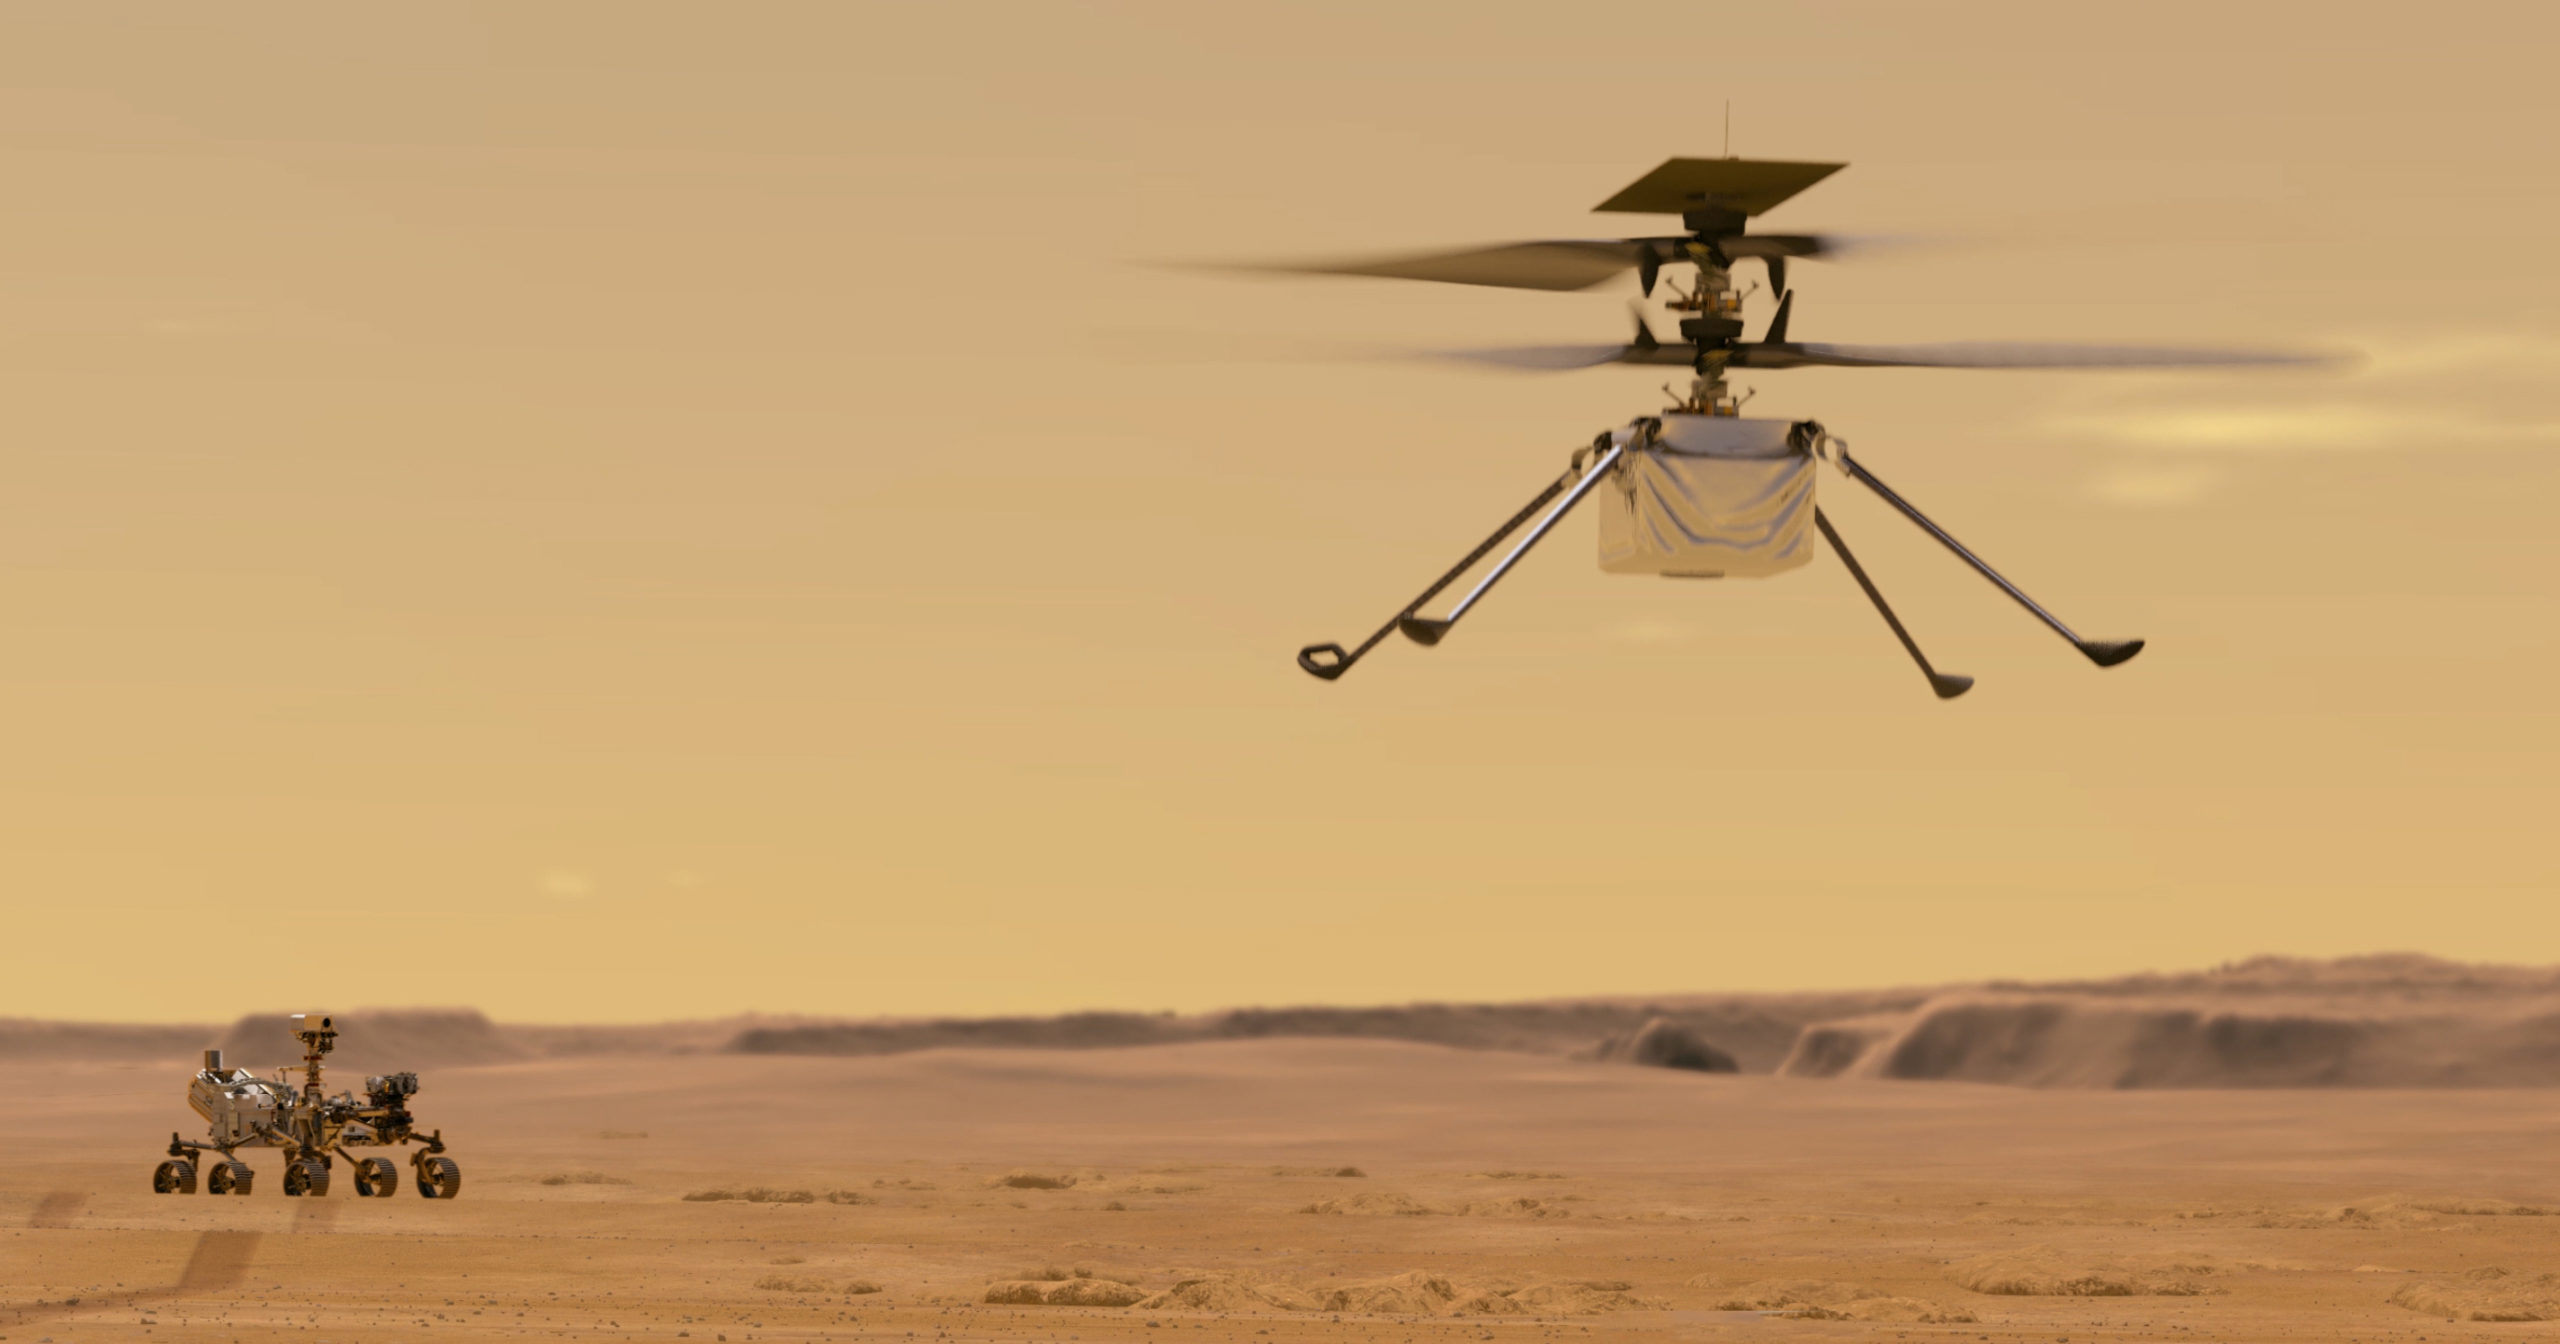 This illustration depicts the Ingenuity helicopter on Mars.